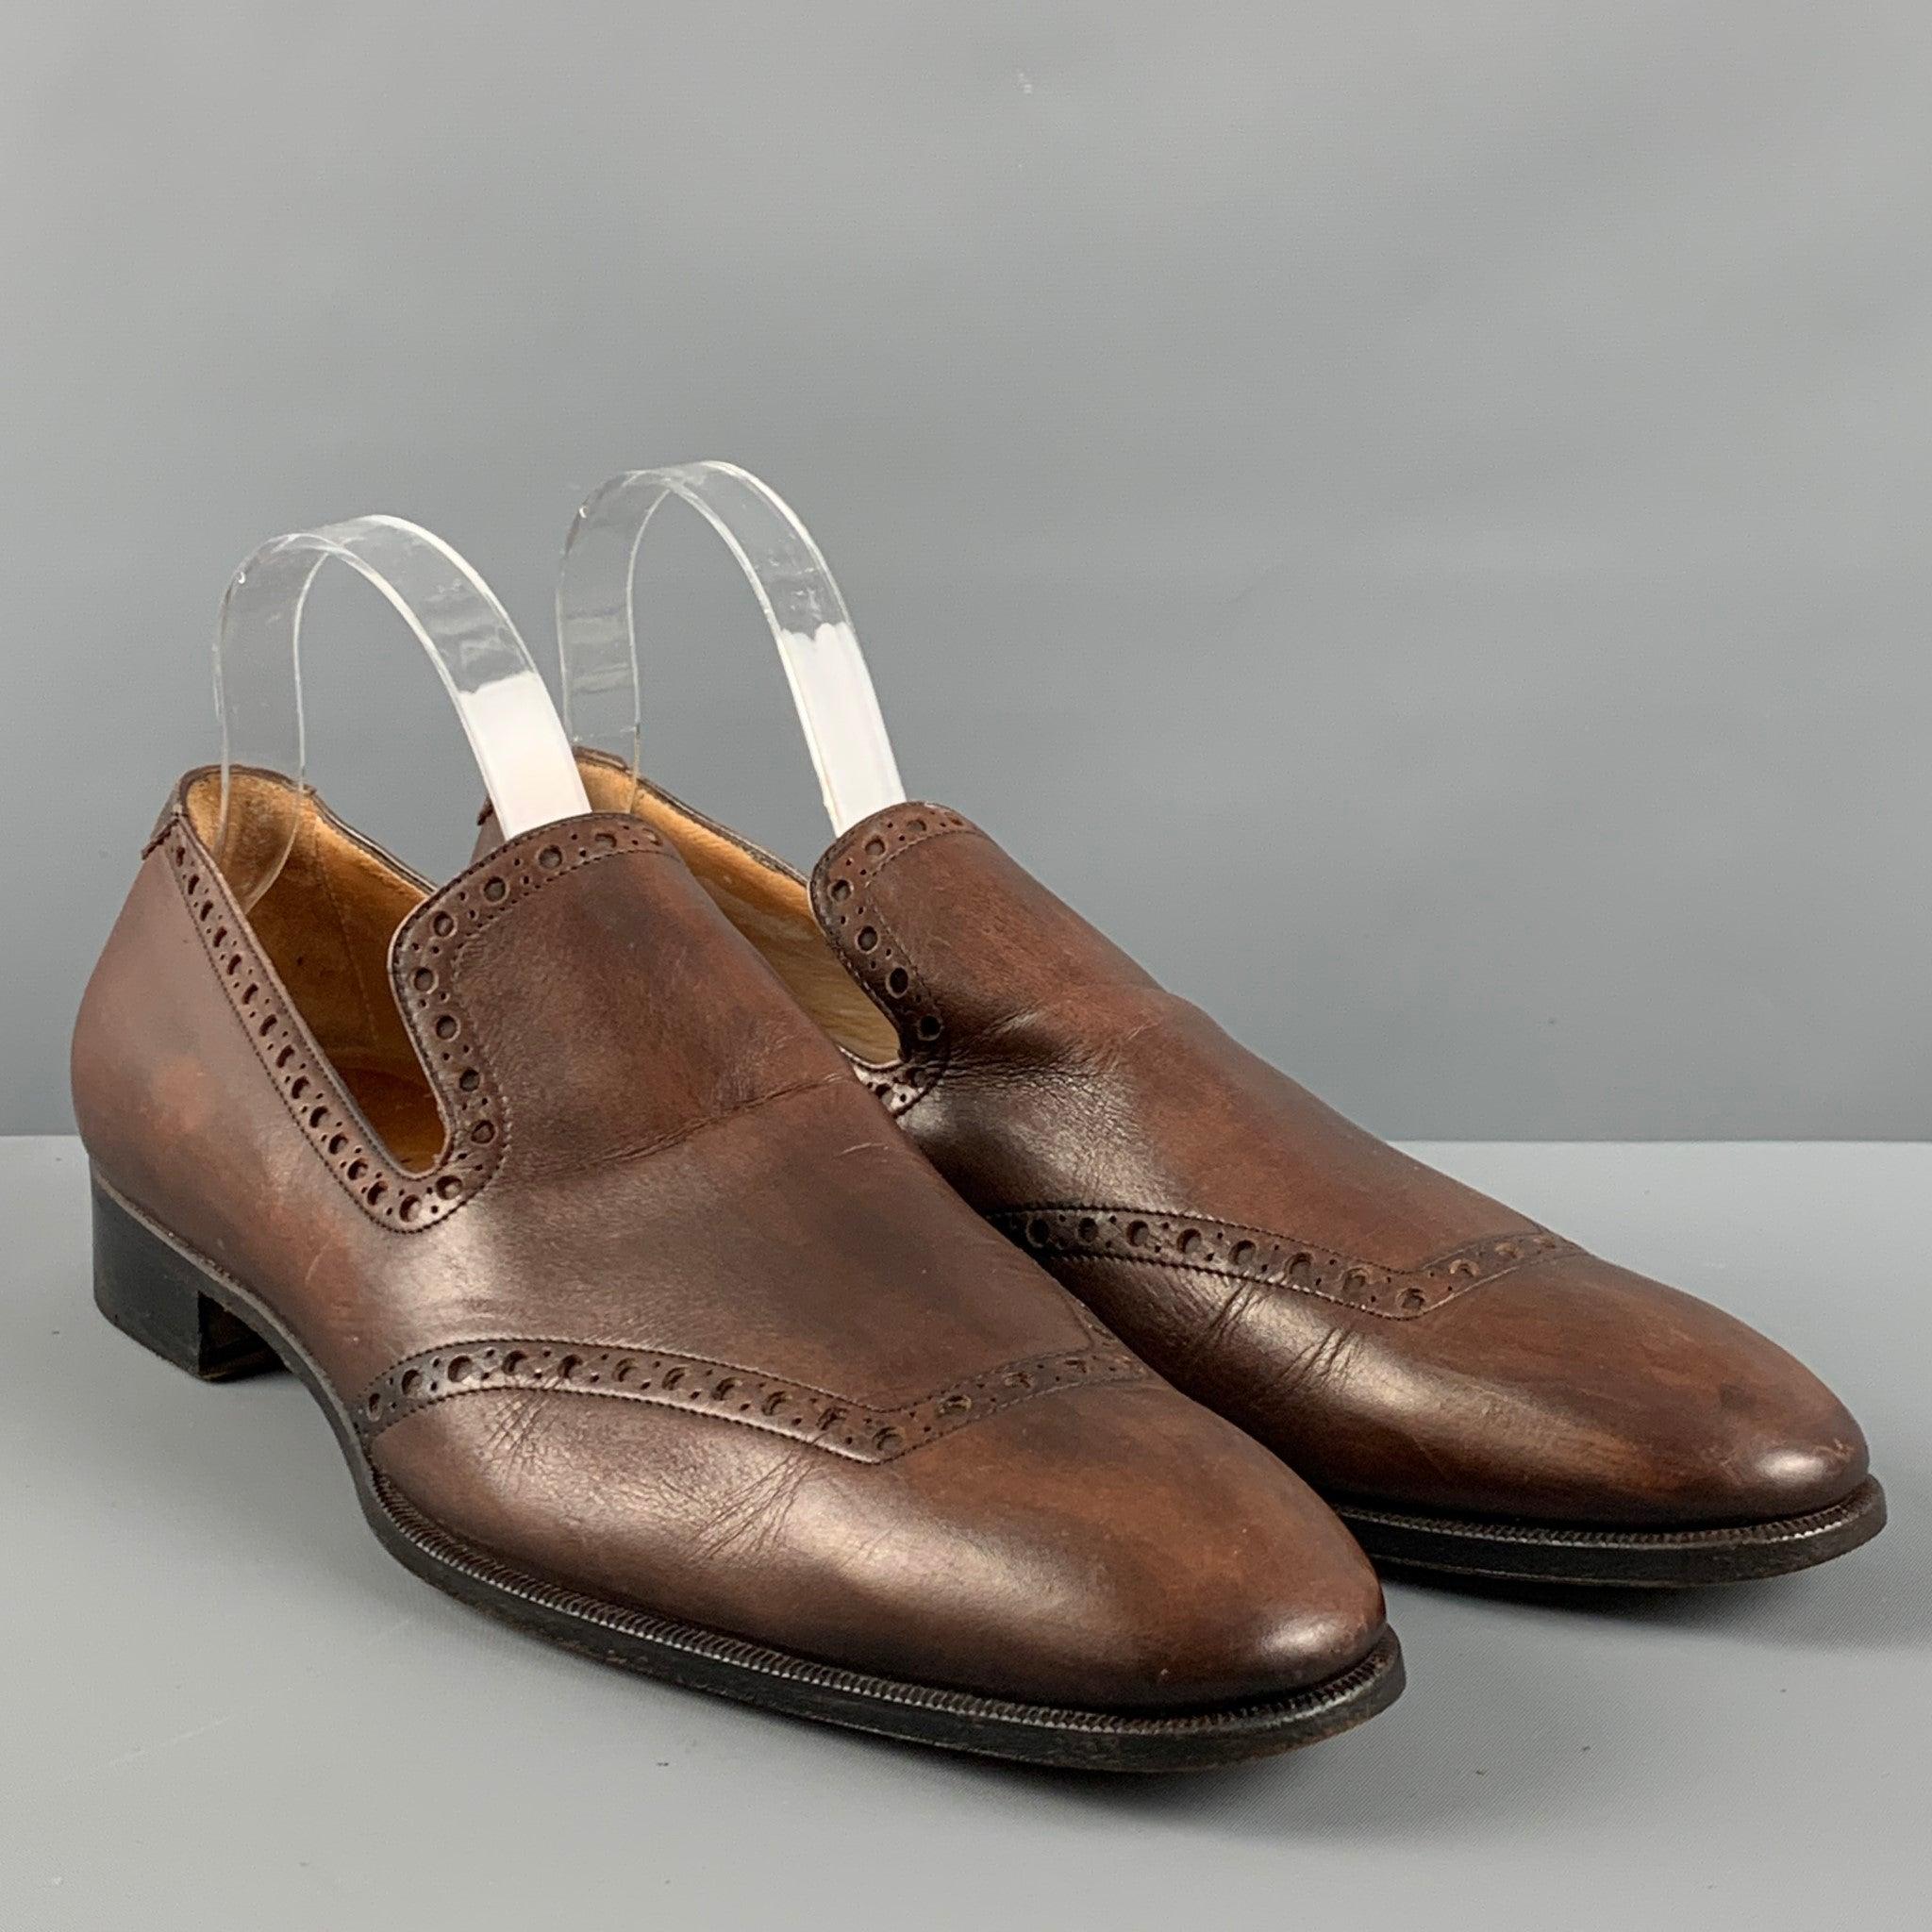 YVES SAINT LAURENT shoes comes in a brown perforated leather featuring a cap toe and a slip on style. Made in Italy.Very Good Pre-Owned Condition. Moderate signs of wear. 

Marked:   0214 43Outsole: 12.75 inches  x 4.25 inches  
  
  
 
Reference: